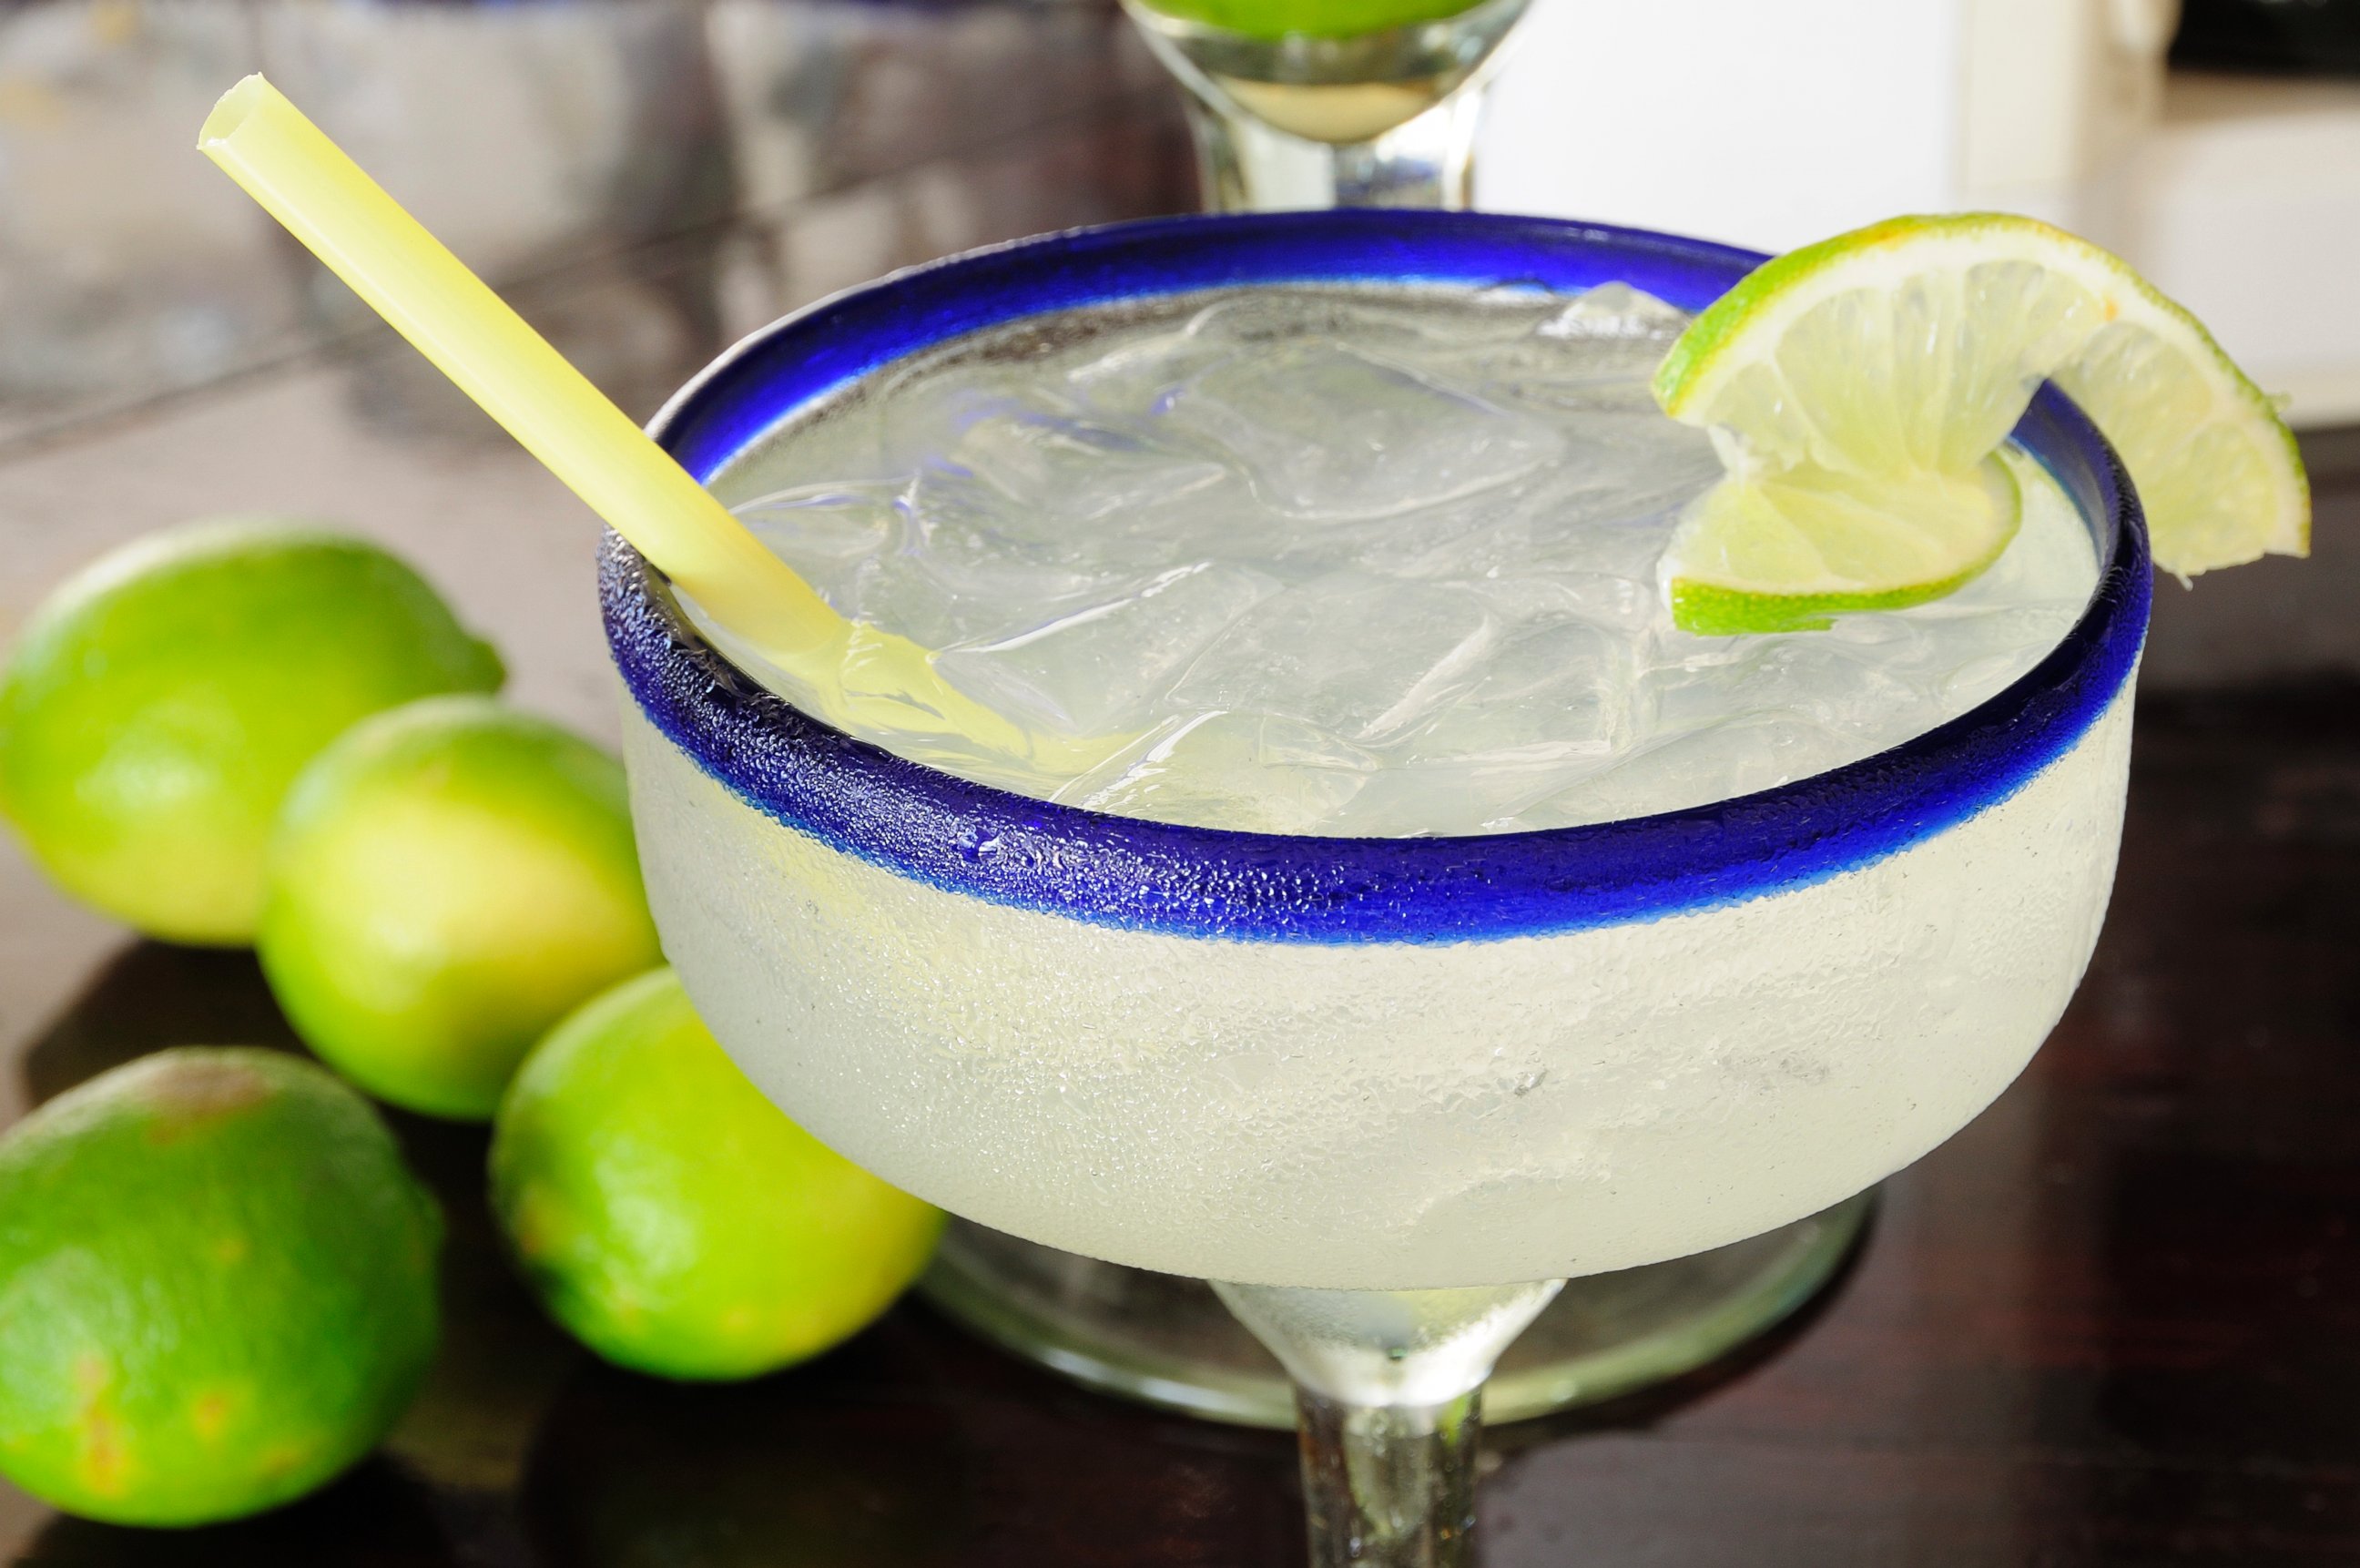 PHOTO: A frosted glass of a margarita cocktail served with ice and slice of lime with whole limes at side is pictured in this undated photo.